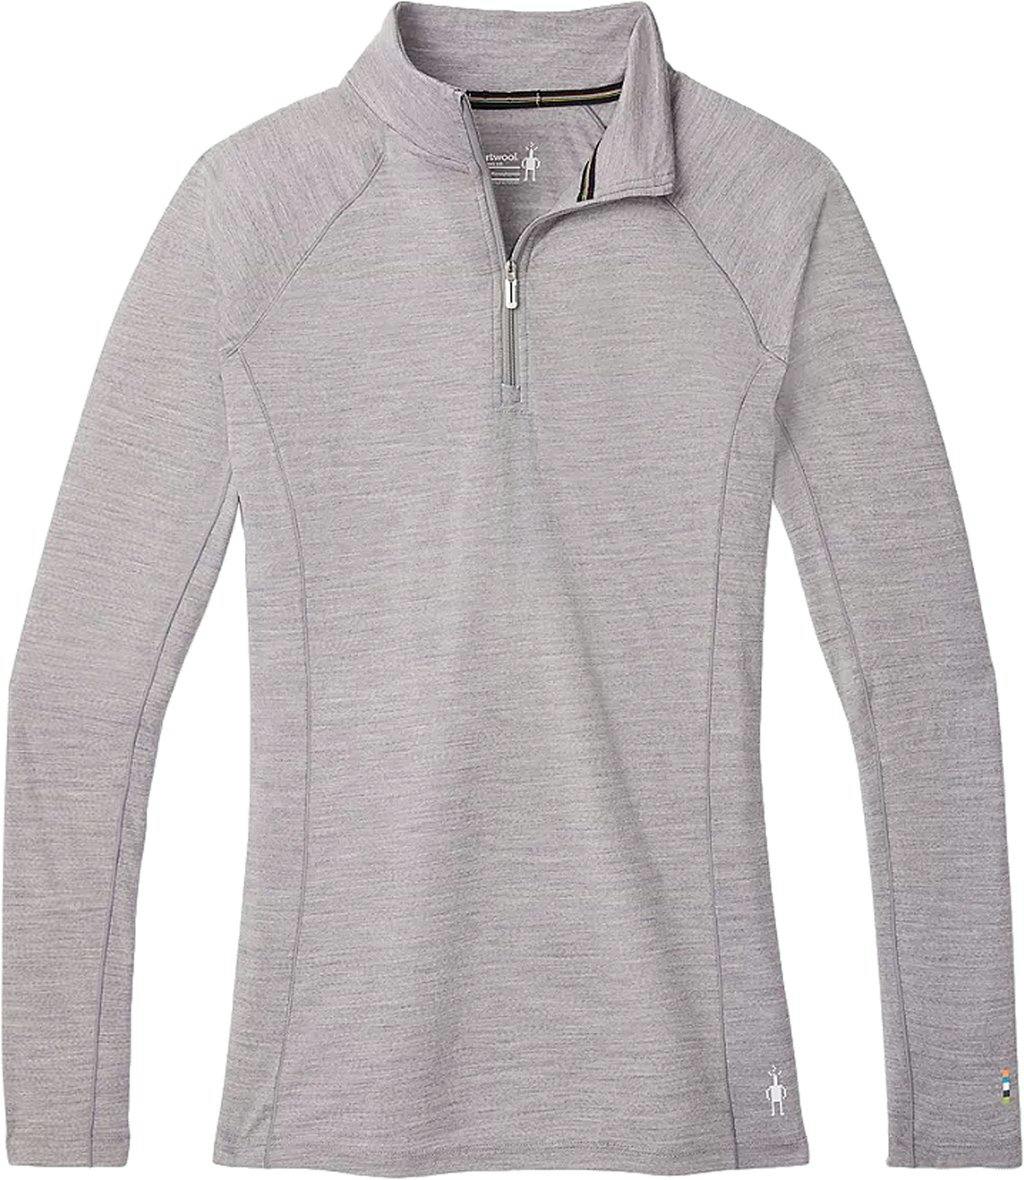 Product image for Classic All-Season Merino Base Layer 1/4 Zip Boxed - Women's